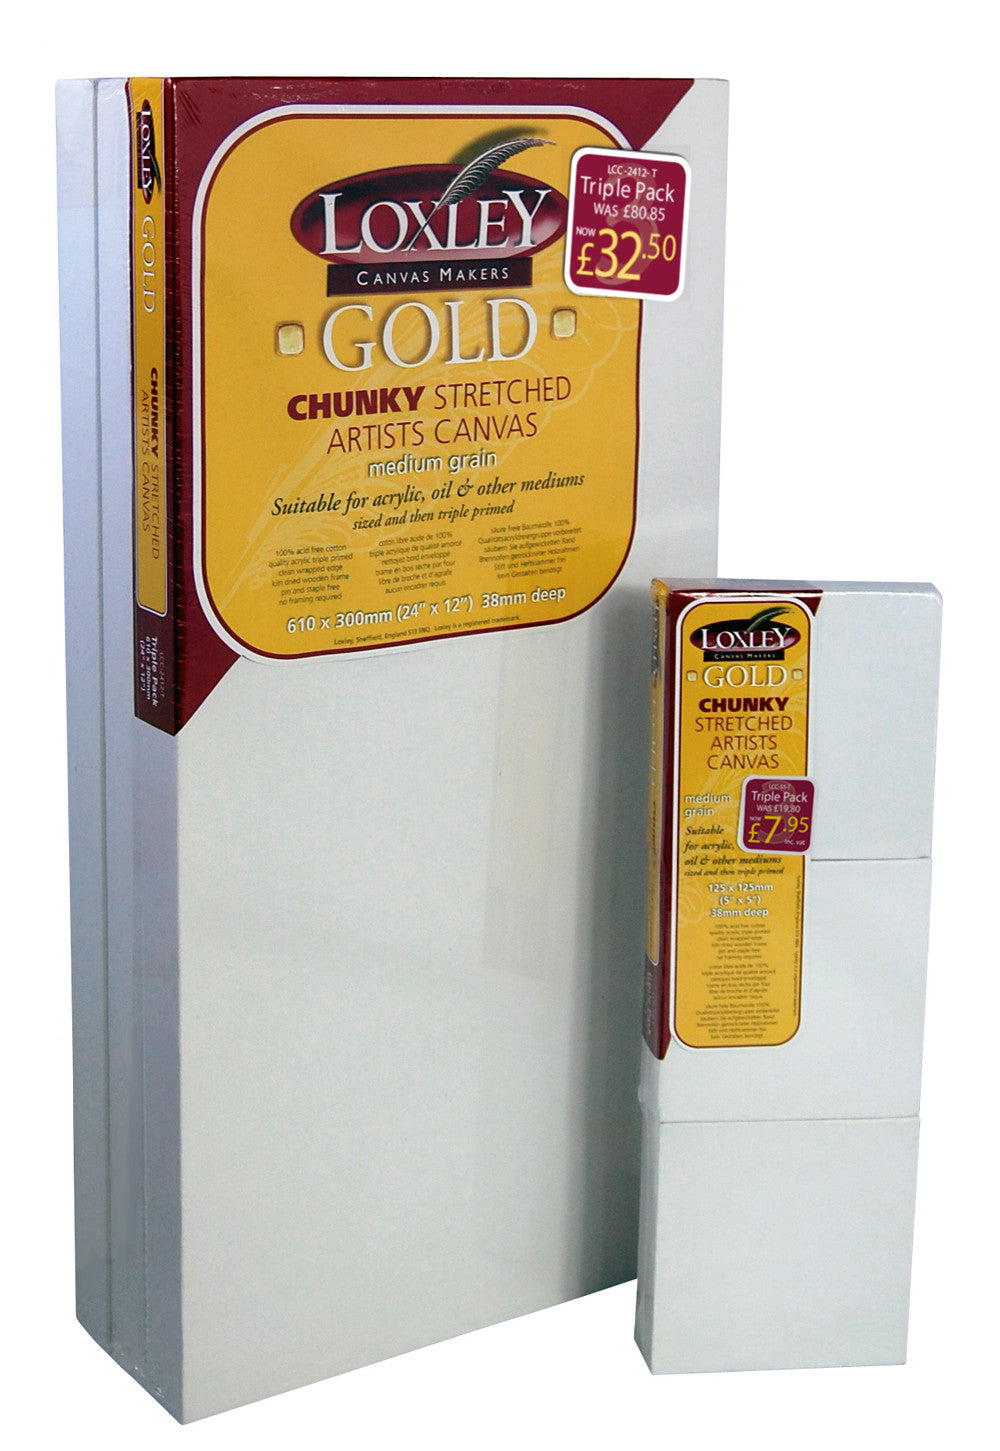 CARTONS - LOXLEY GOLD CHUNKY STRETCHED CANVAS